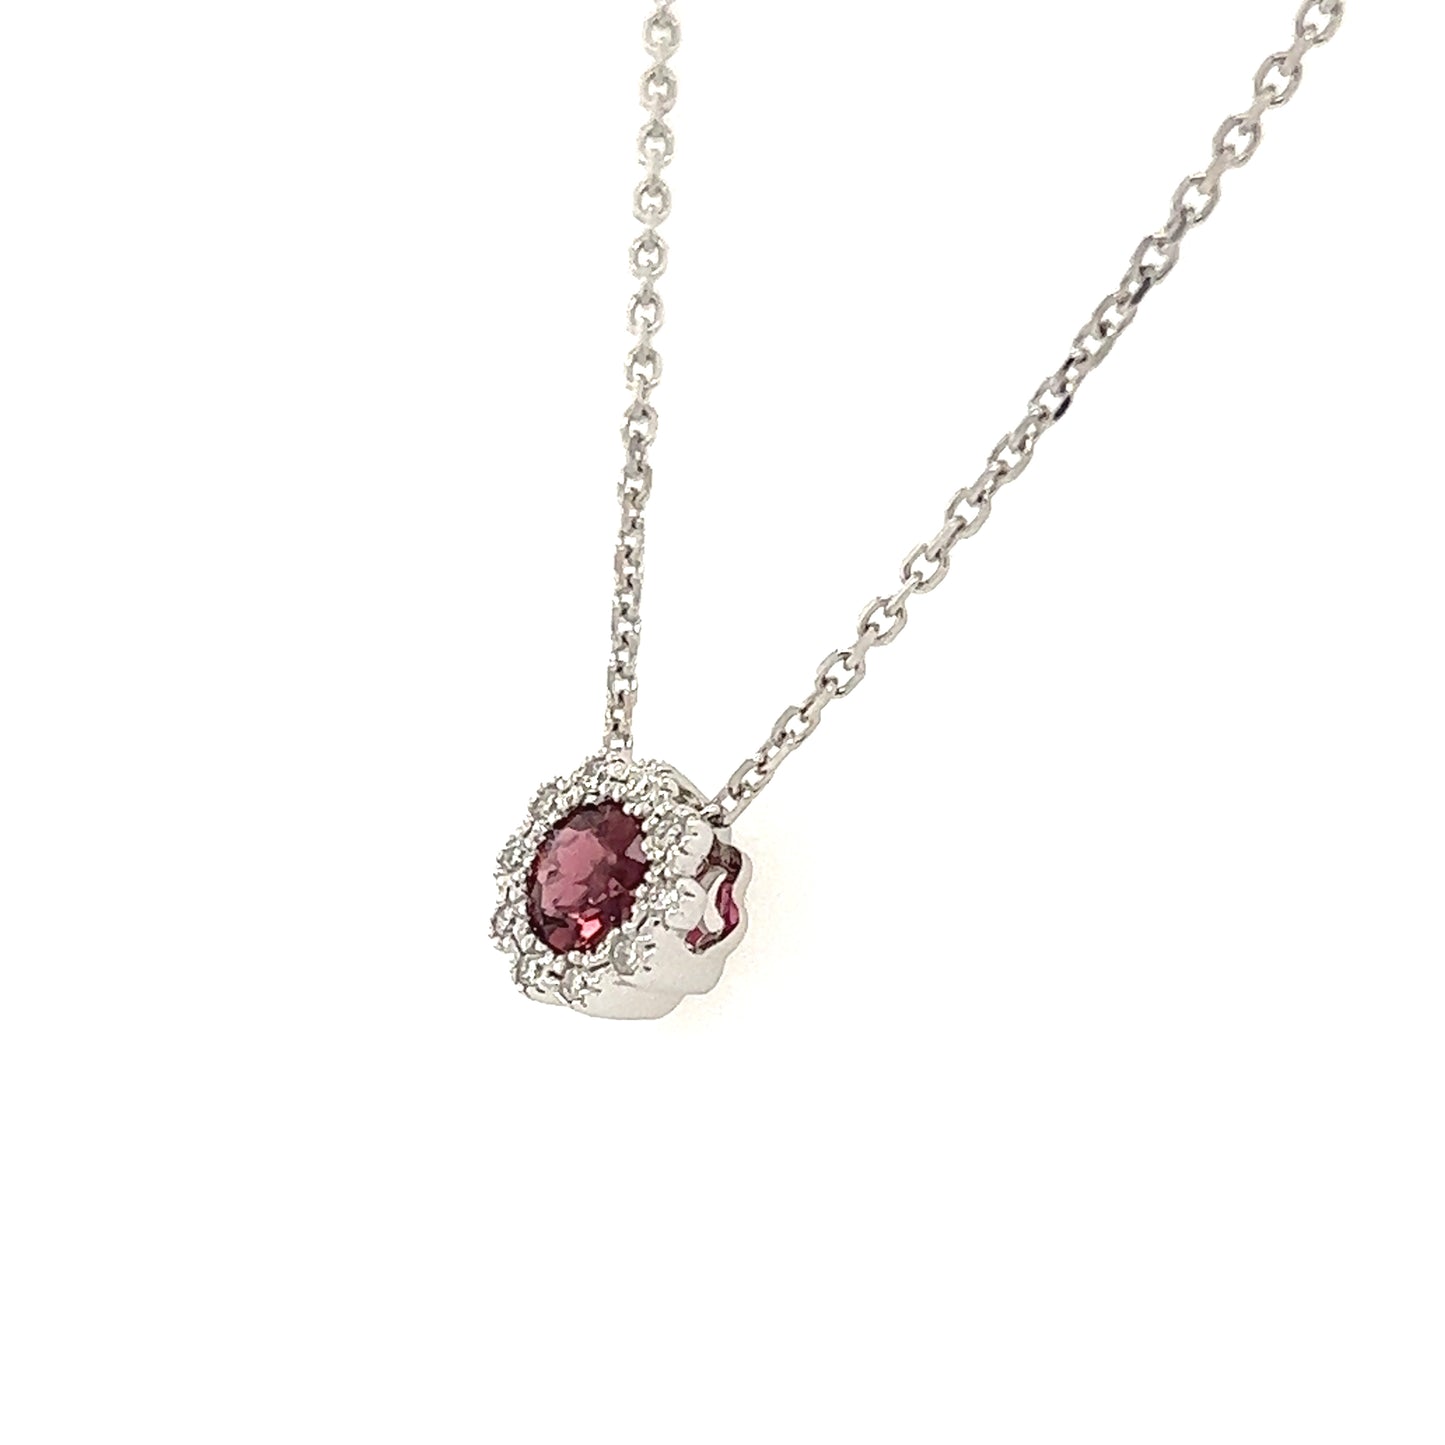 Floral Tourmaline Pendant with Diamond Halo in 14K White Gold Left Side View Pendant and Chain